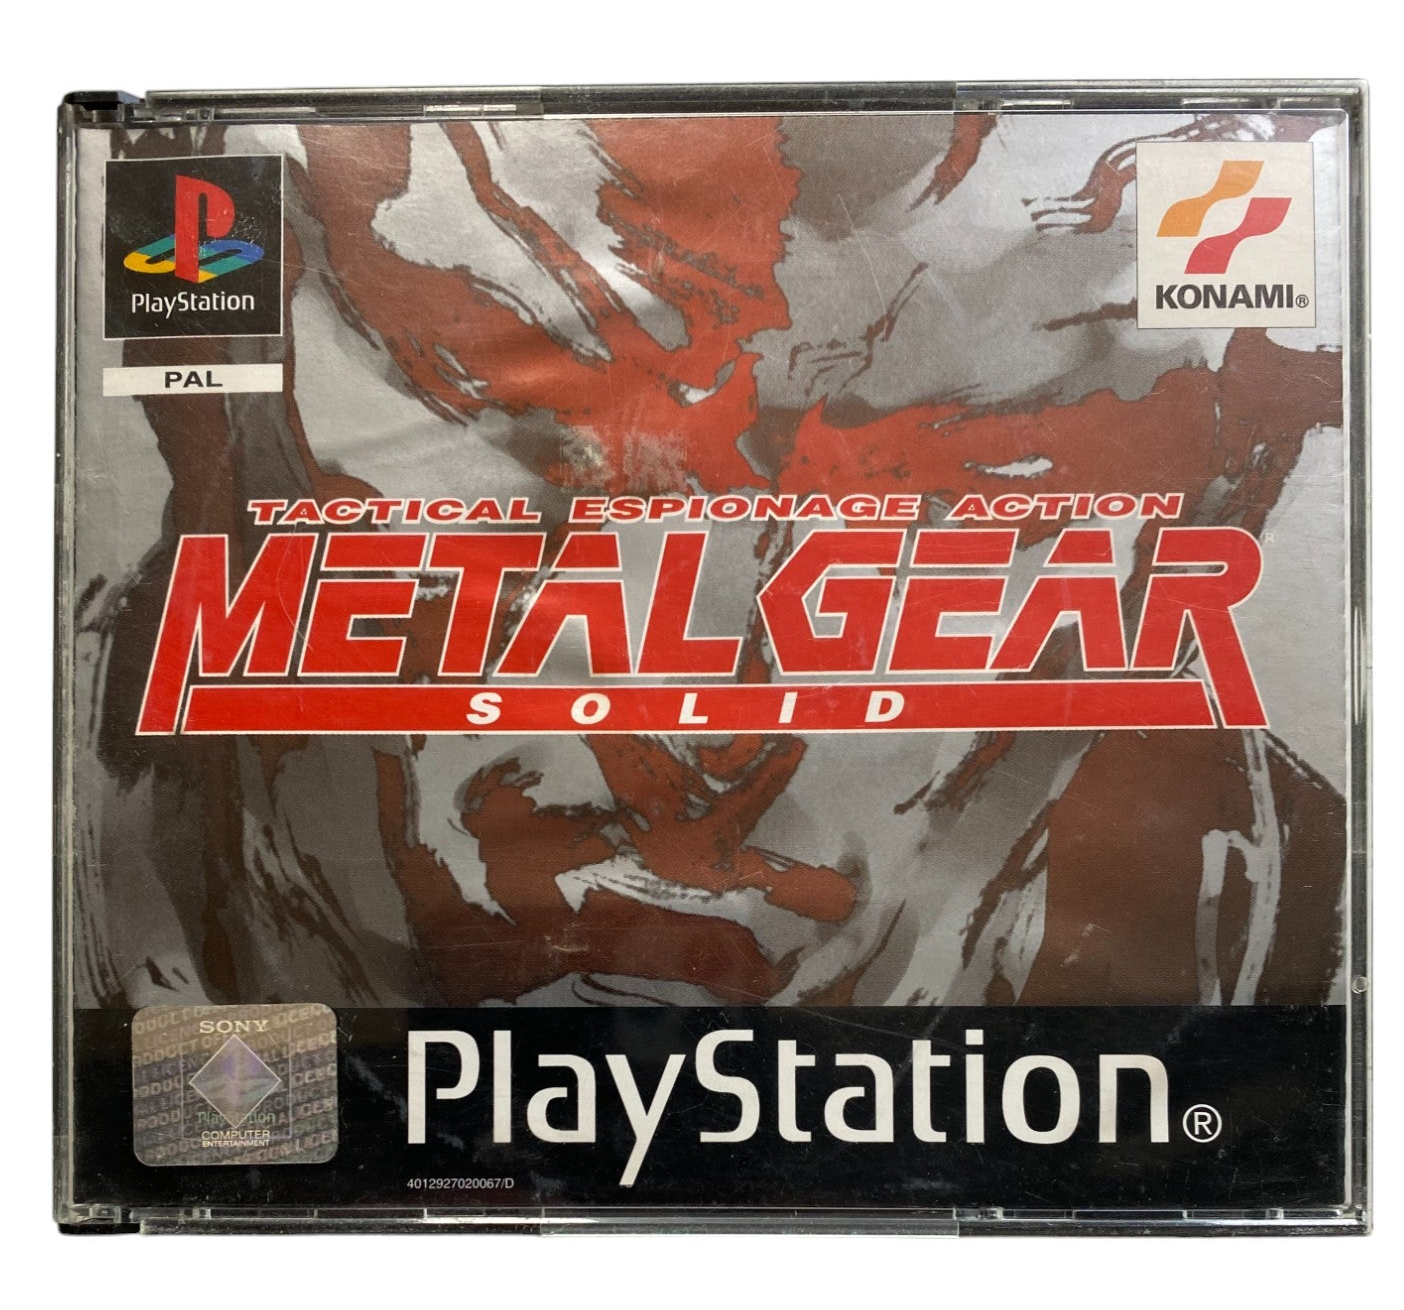 PS1 - Metal Gear Solid - inkl. Silent Hill Demo - Playstation 1